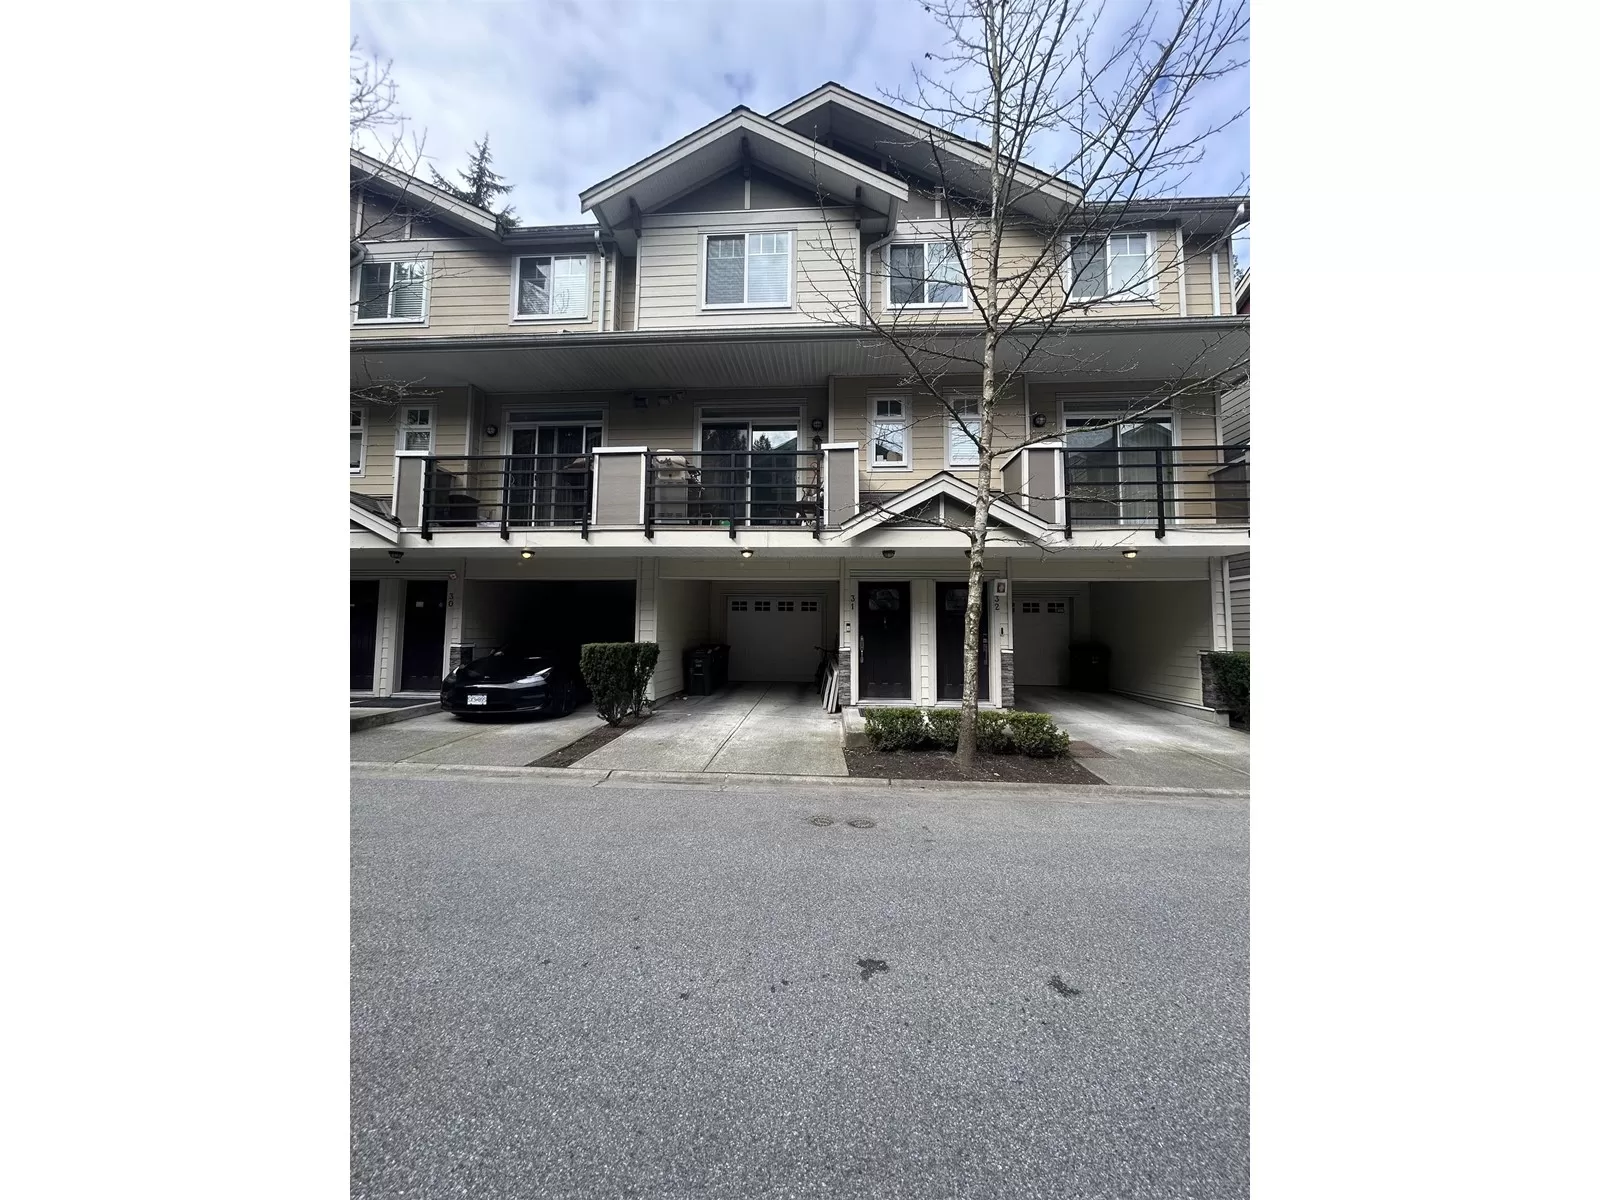 Row / Townhouse for rent: 31 6383 140 Street, Surrey, British Columbia V3W 0E9